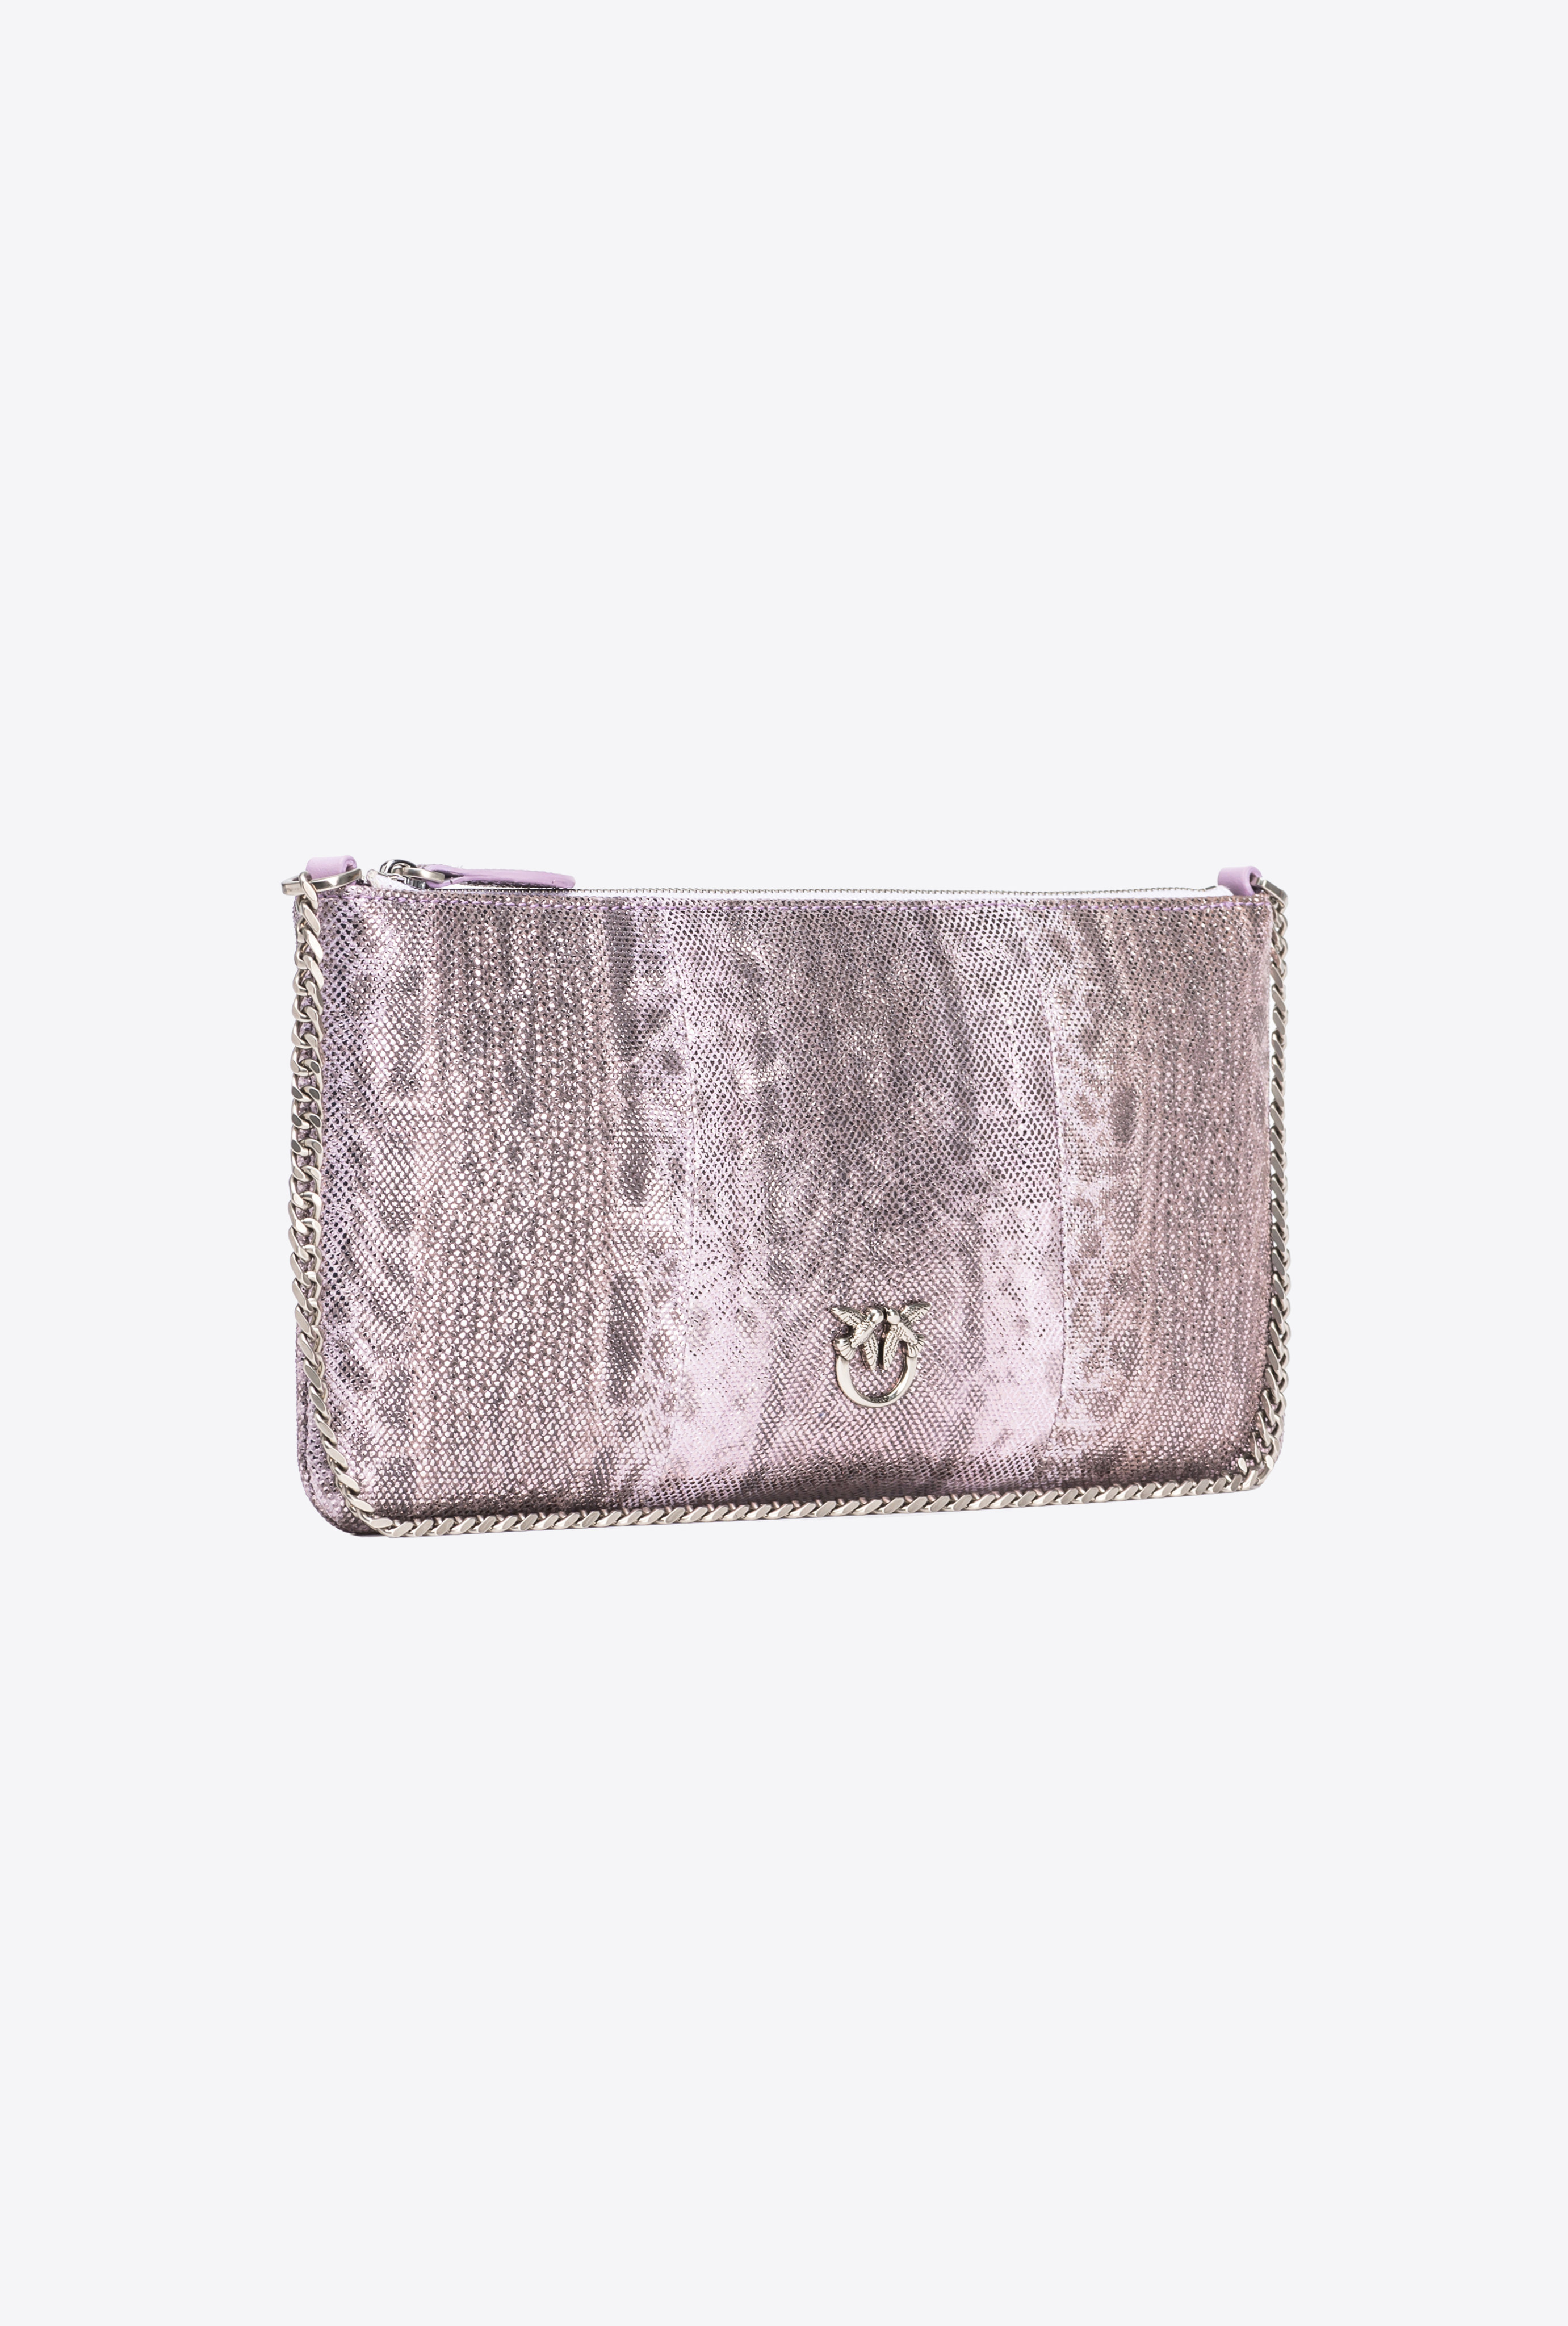 Shop Pinko Galleria Horizontal Flat Crossbody Bag In Glittery Reptile Leather In Lilas-vieil Argent